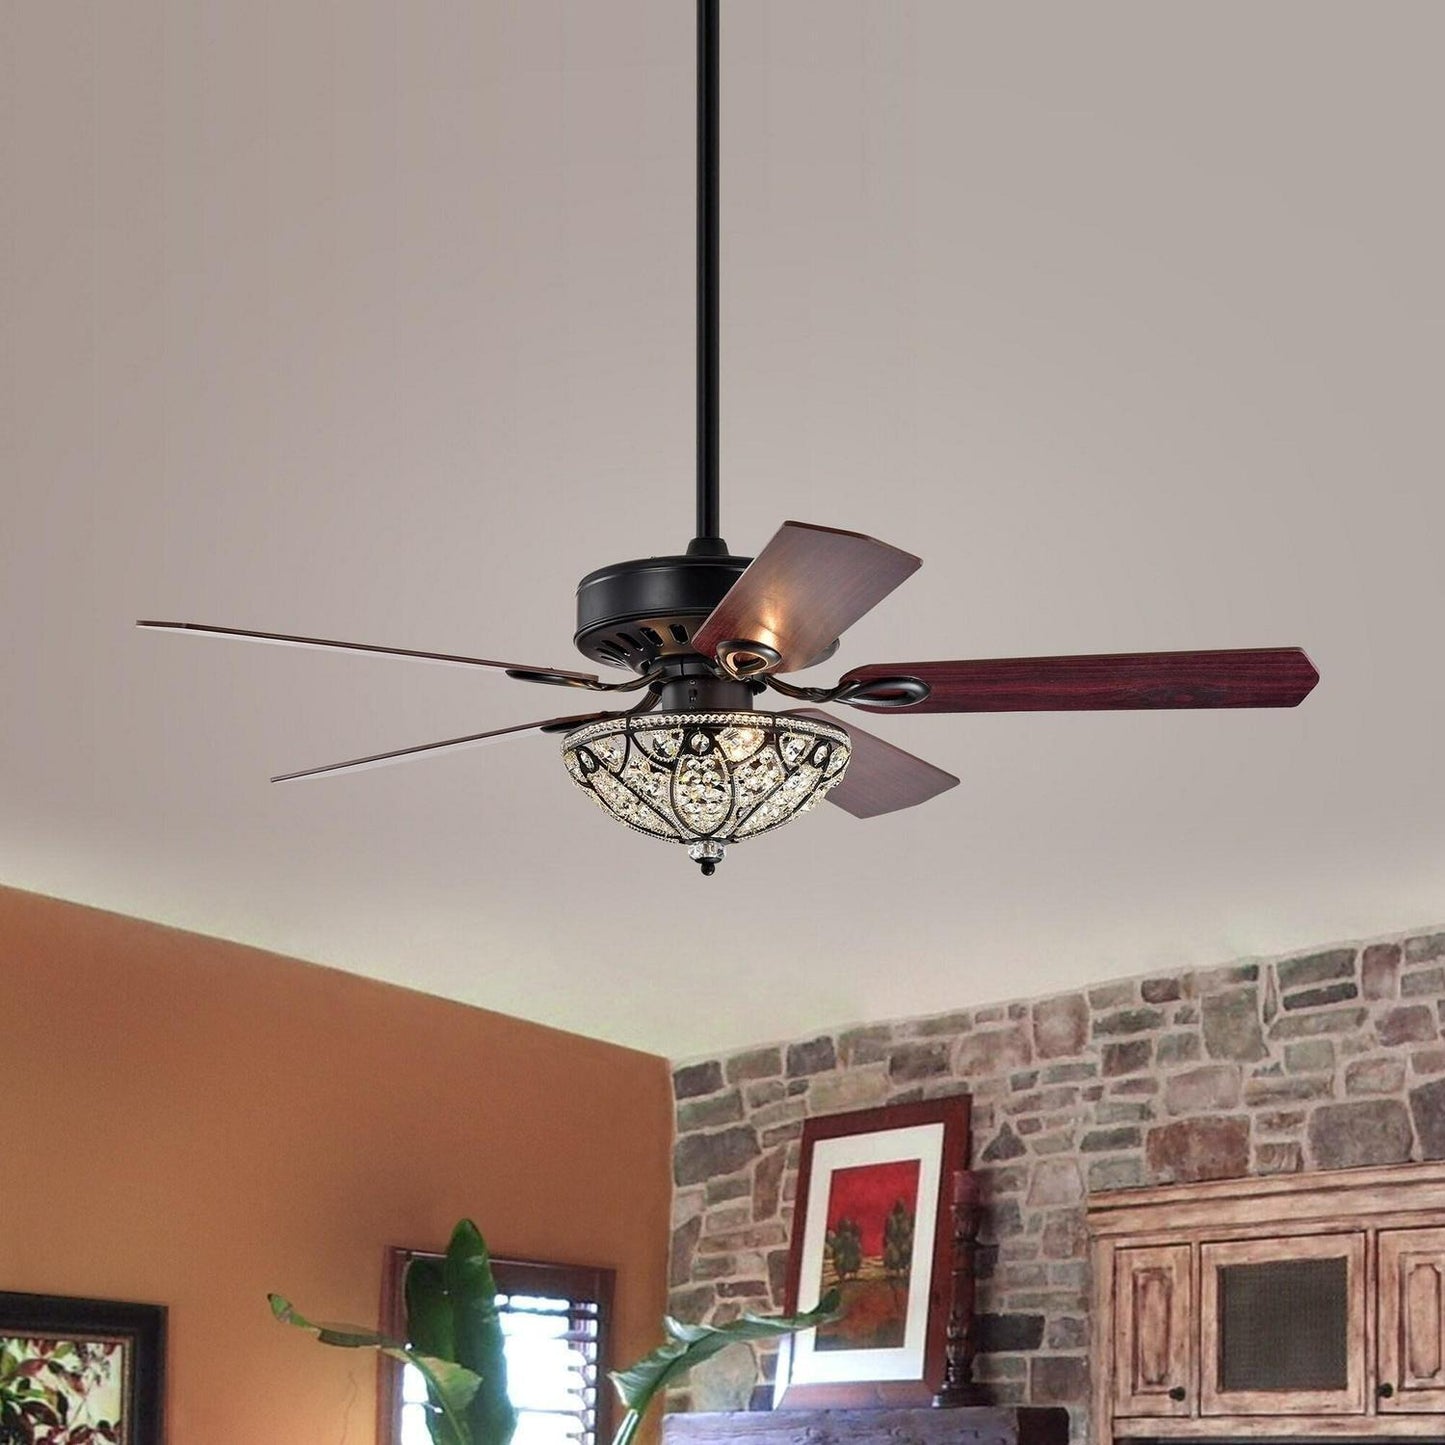 52-inch 5 Blade Crystal Bowl Shade Ceiling Fan with Remote Control